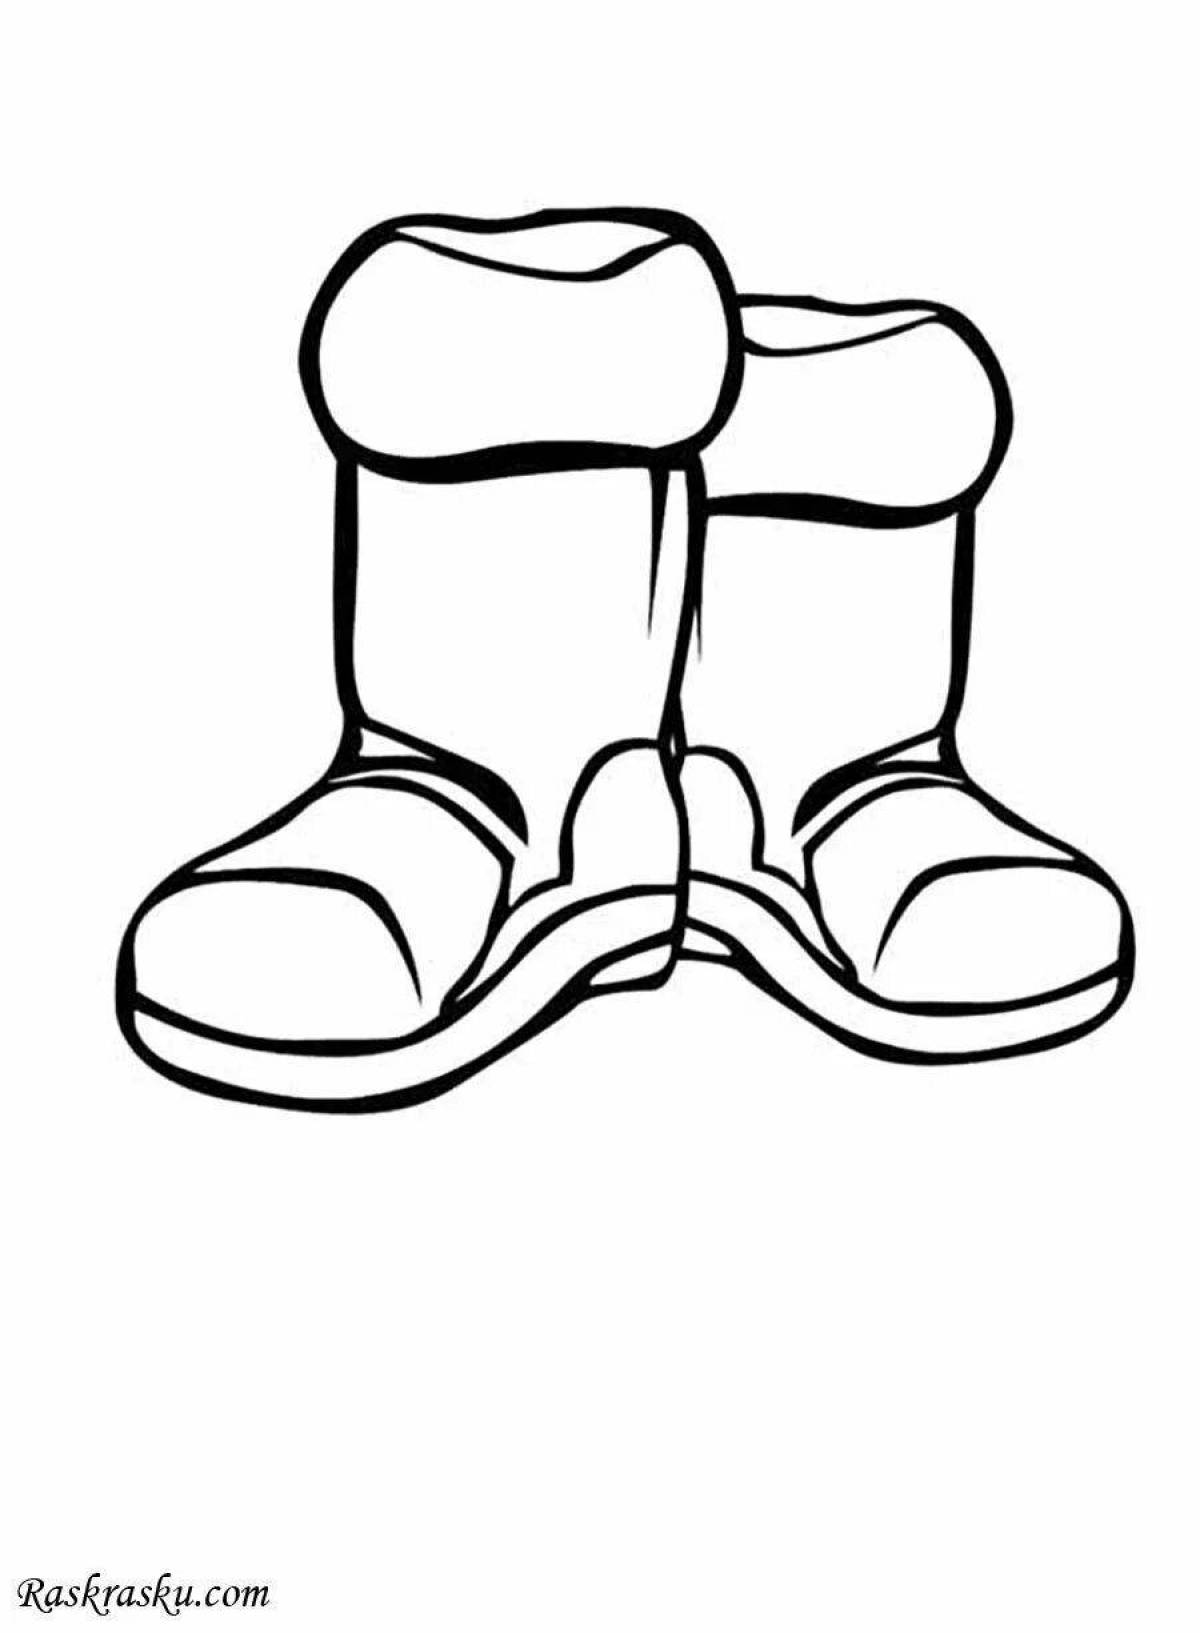 Adorable shoes coloring page for kids